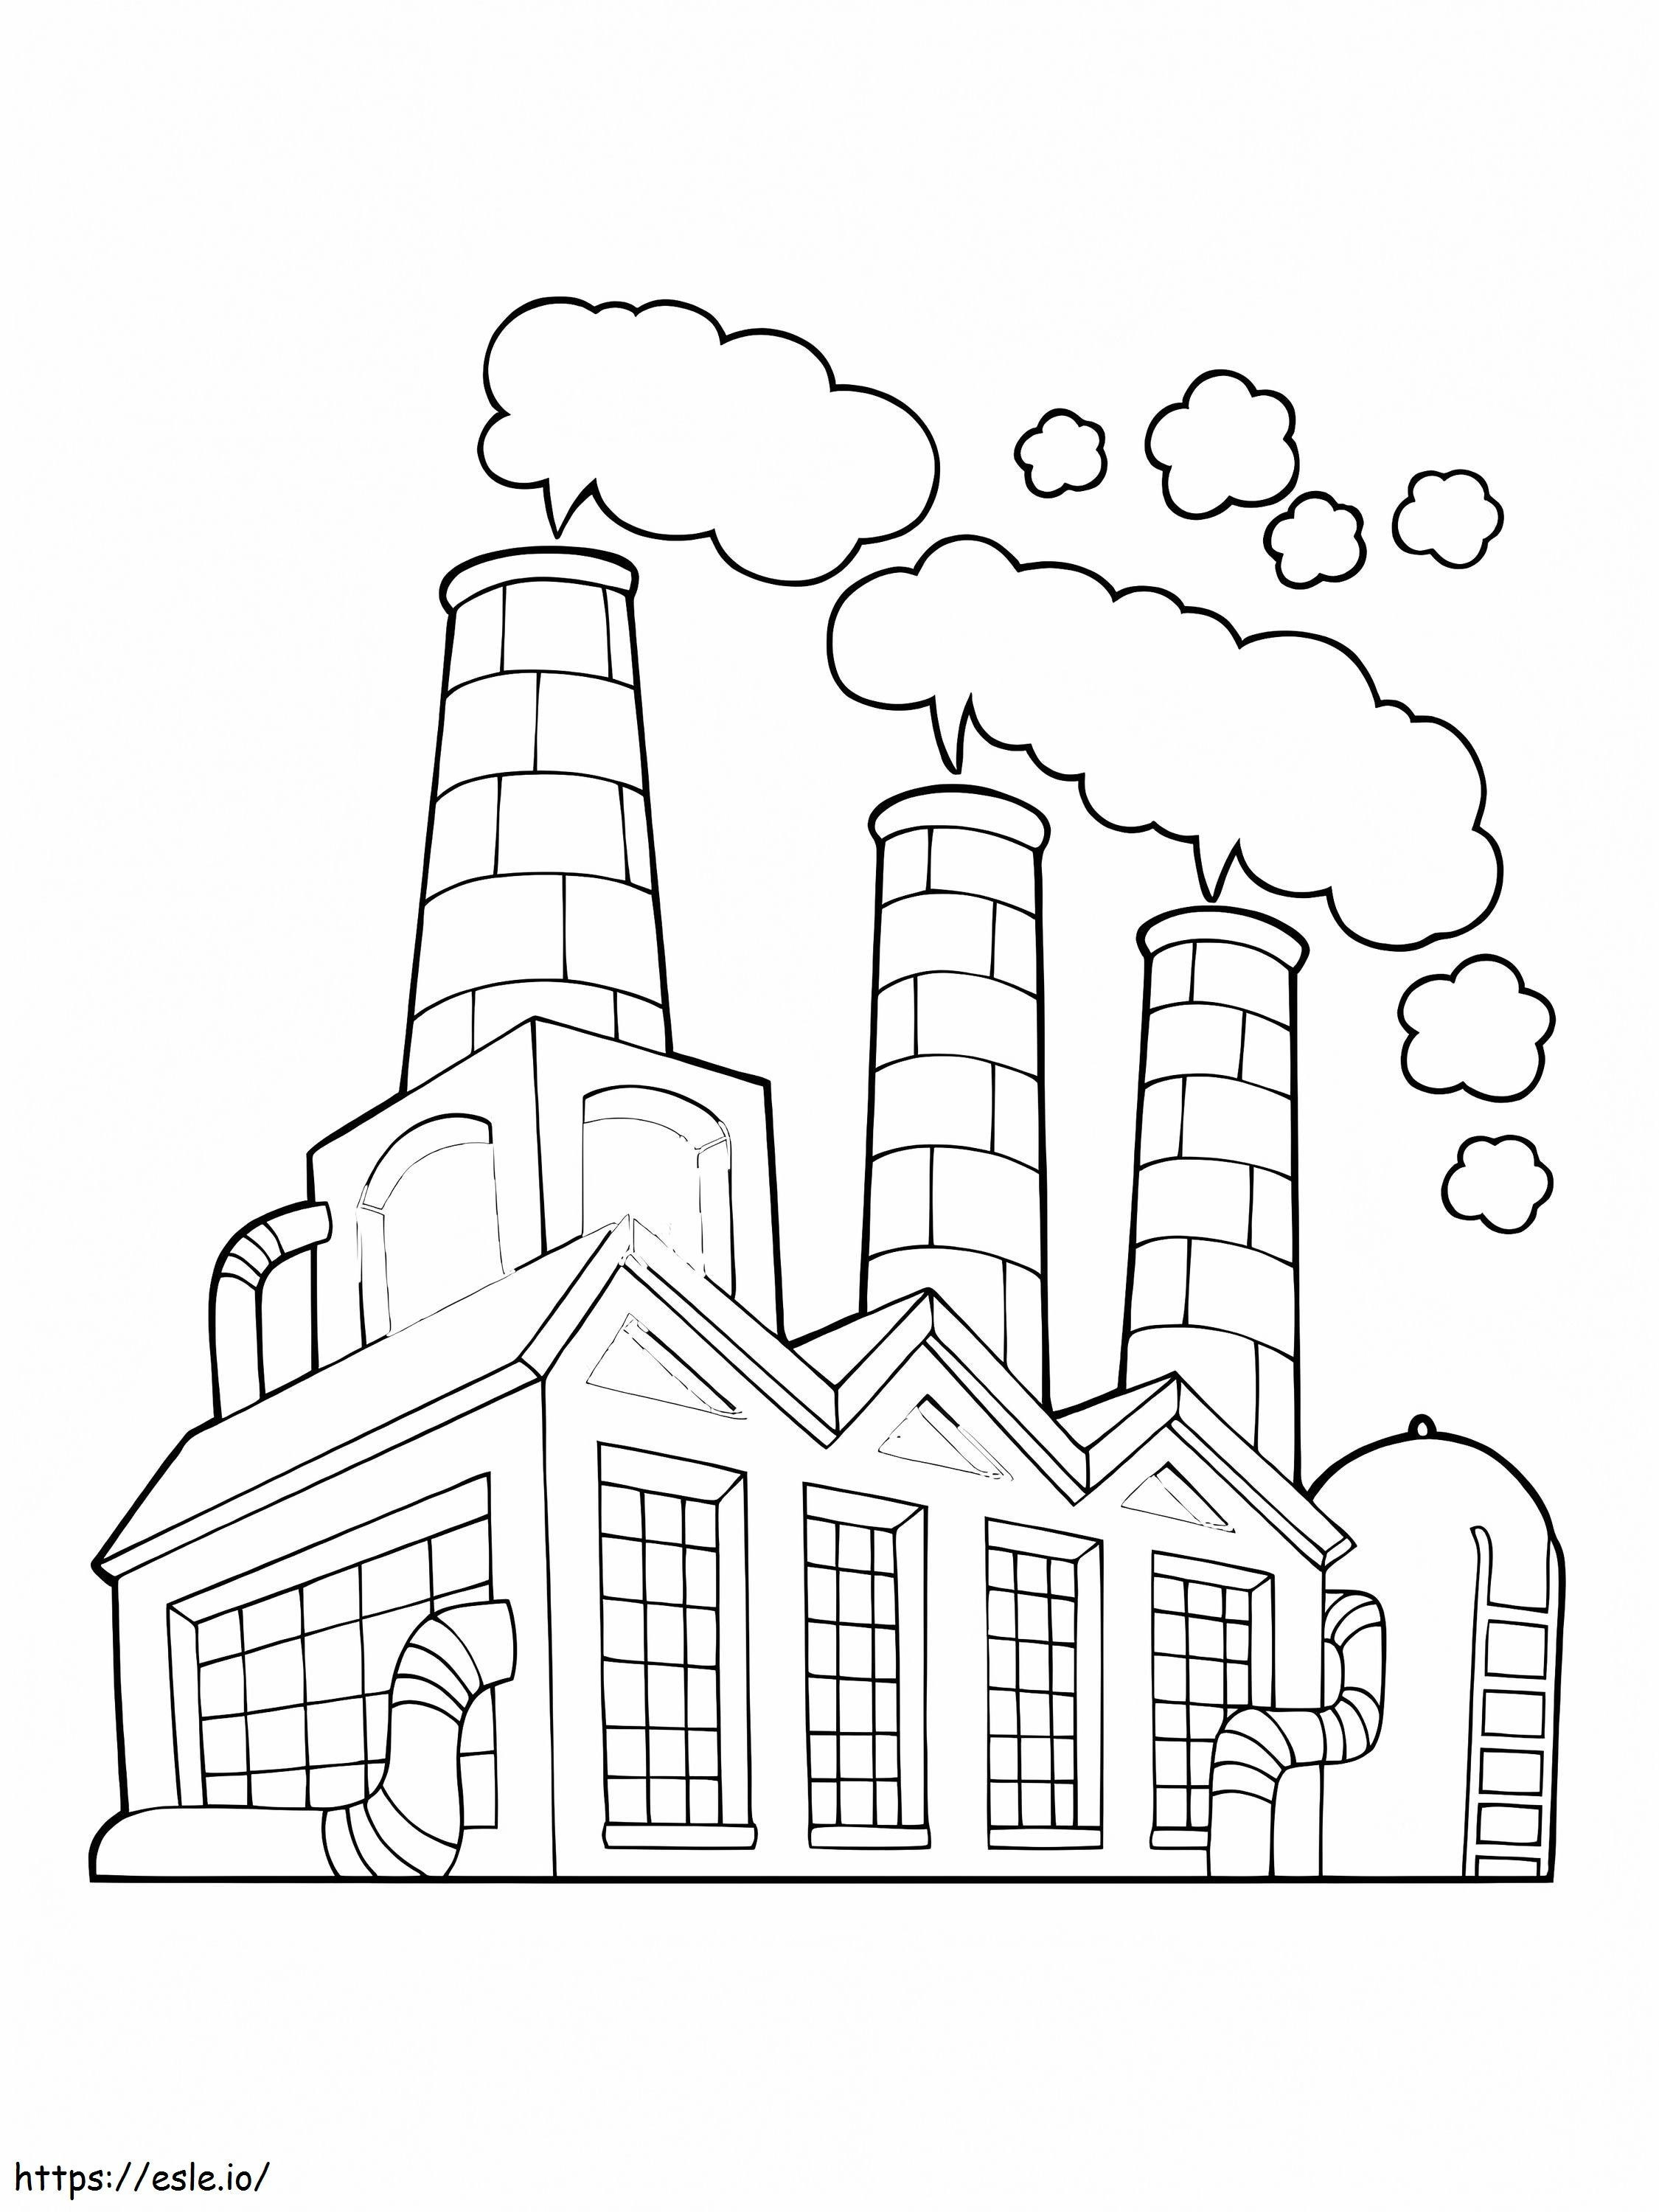 A Factory coloring page